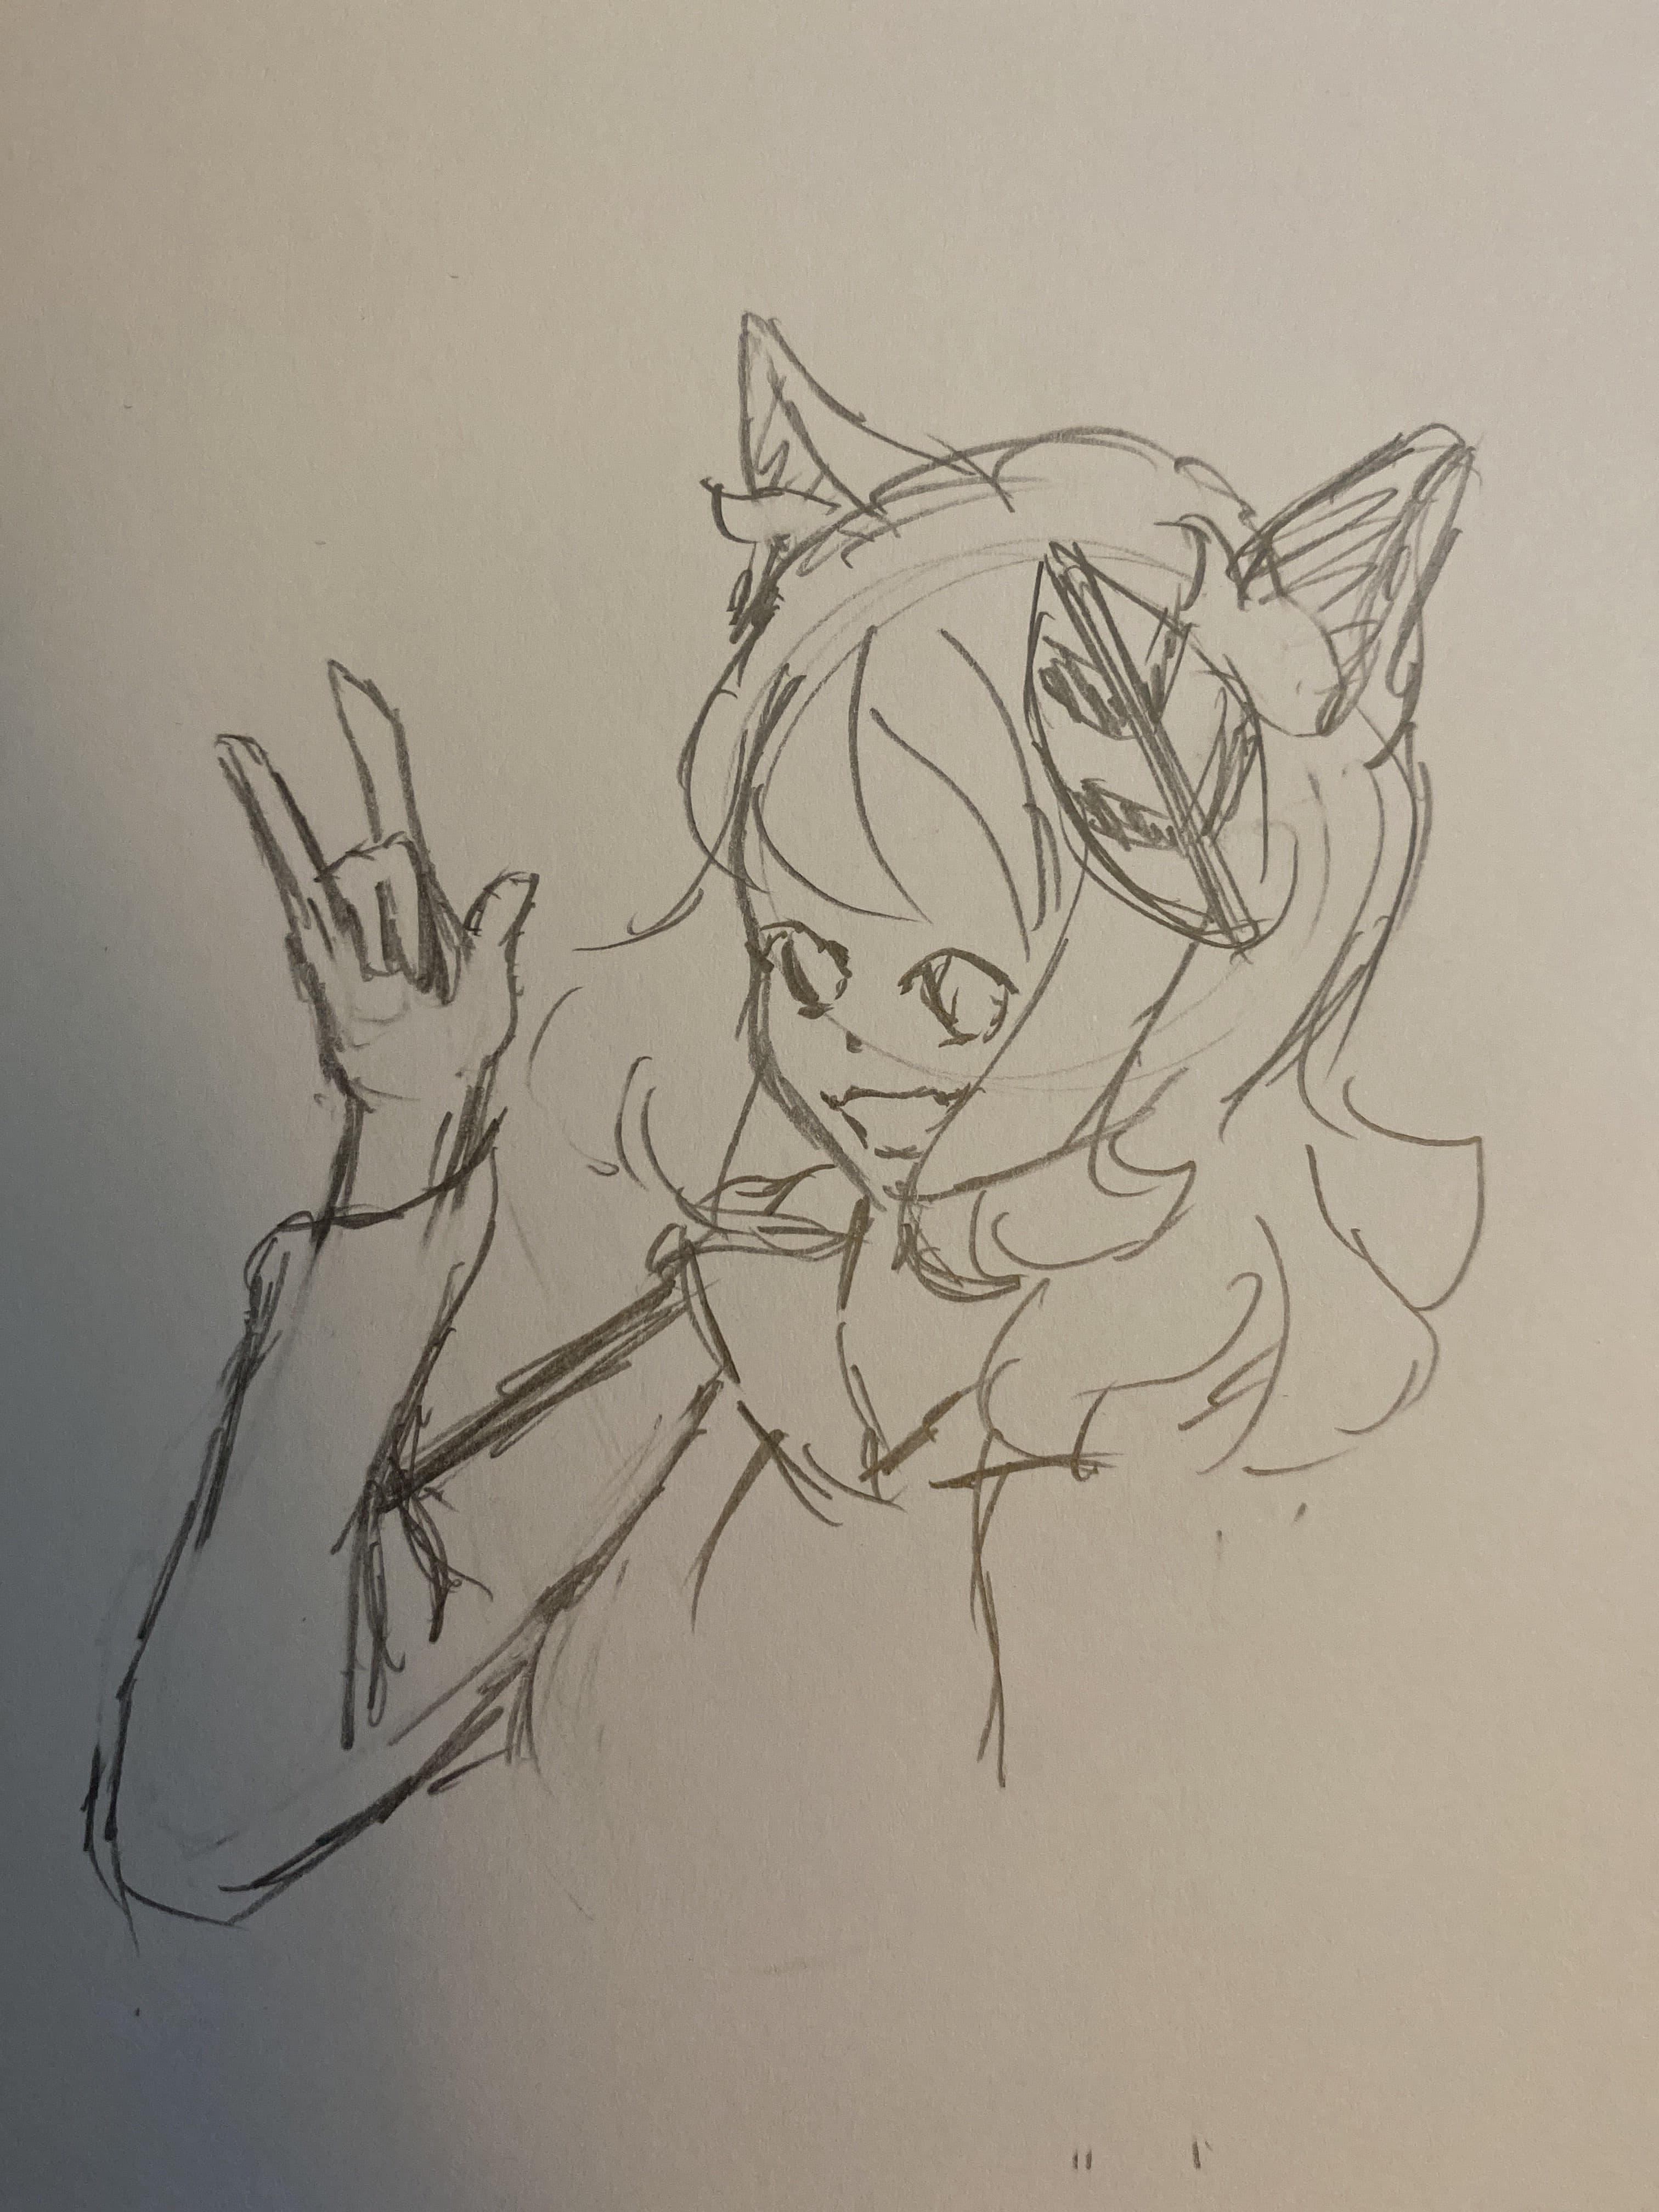 A photo of a pencil sketch of a catgirl holding one hand up in a "rock-and-roll" symbol (point, pinkie, and thumb fingers extended), with a pointy version of my basil leaf design in her hair. Her mouth is opened in a happy expression, and she is facing in a leftward direction. Her hair is slightly longer than shoulder length, and splays out near the bottom. She's wearing a long-sleeved shirt with a very loose collar.